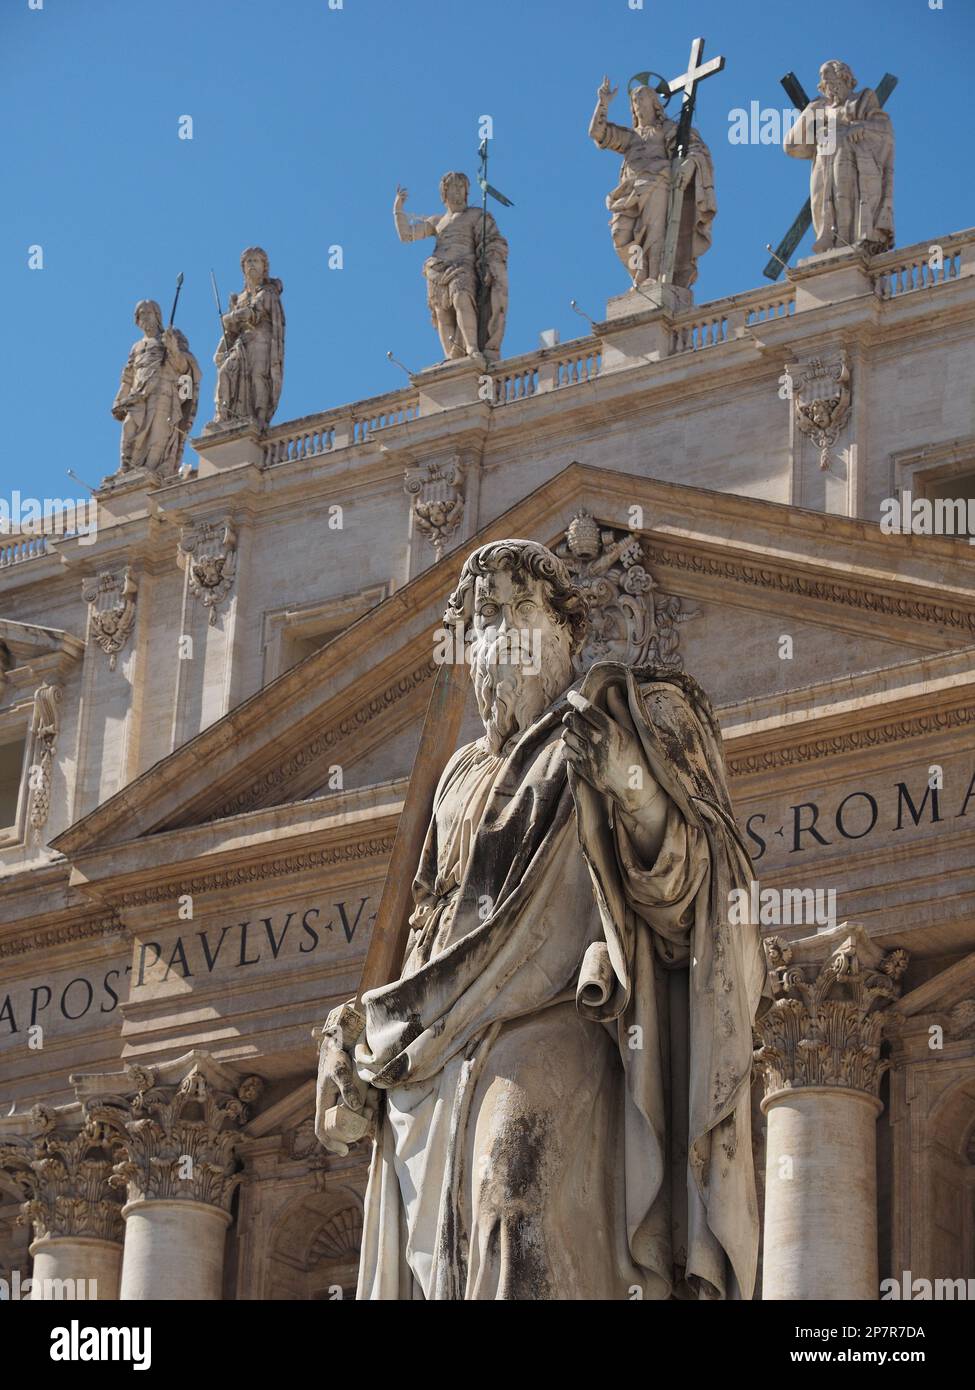 Architecture details and sculptures in front of, and on top of Saint Peters Basilica in Vatican City, the Vatican. Stock Photo